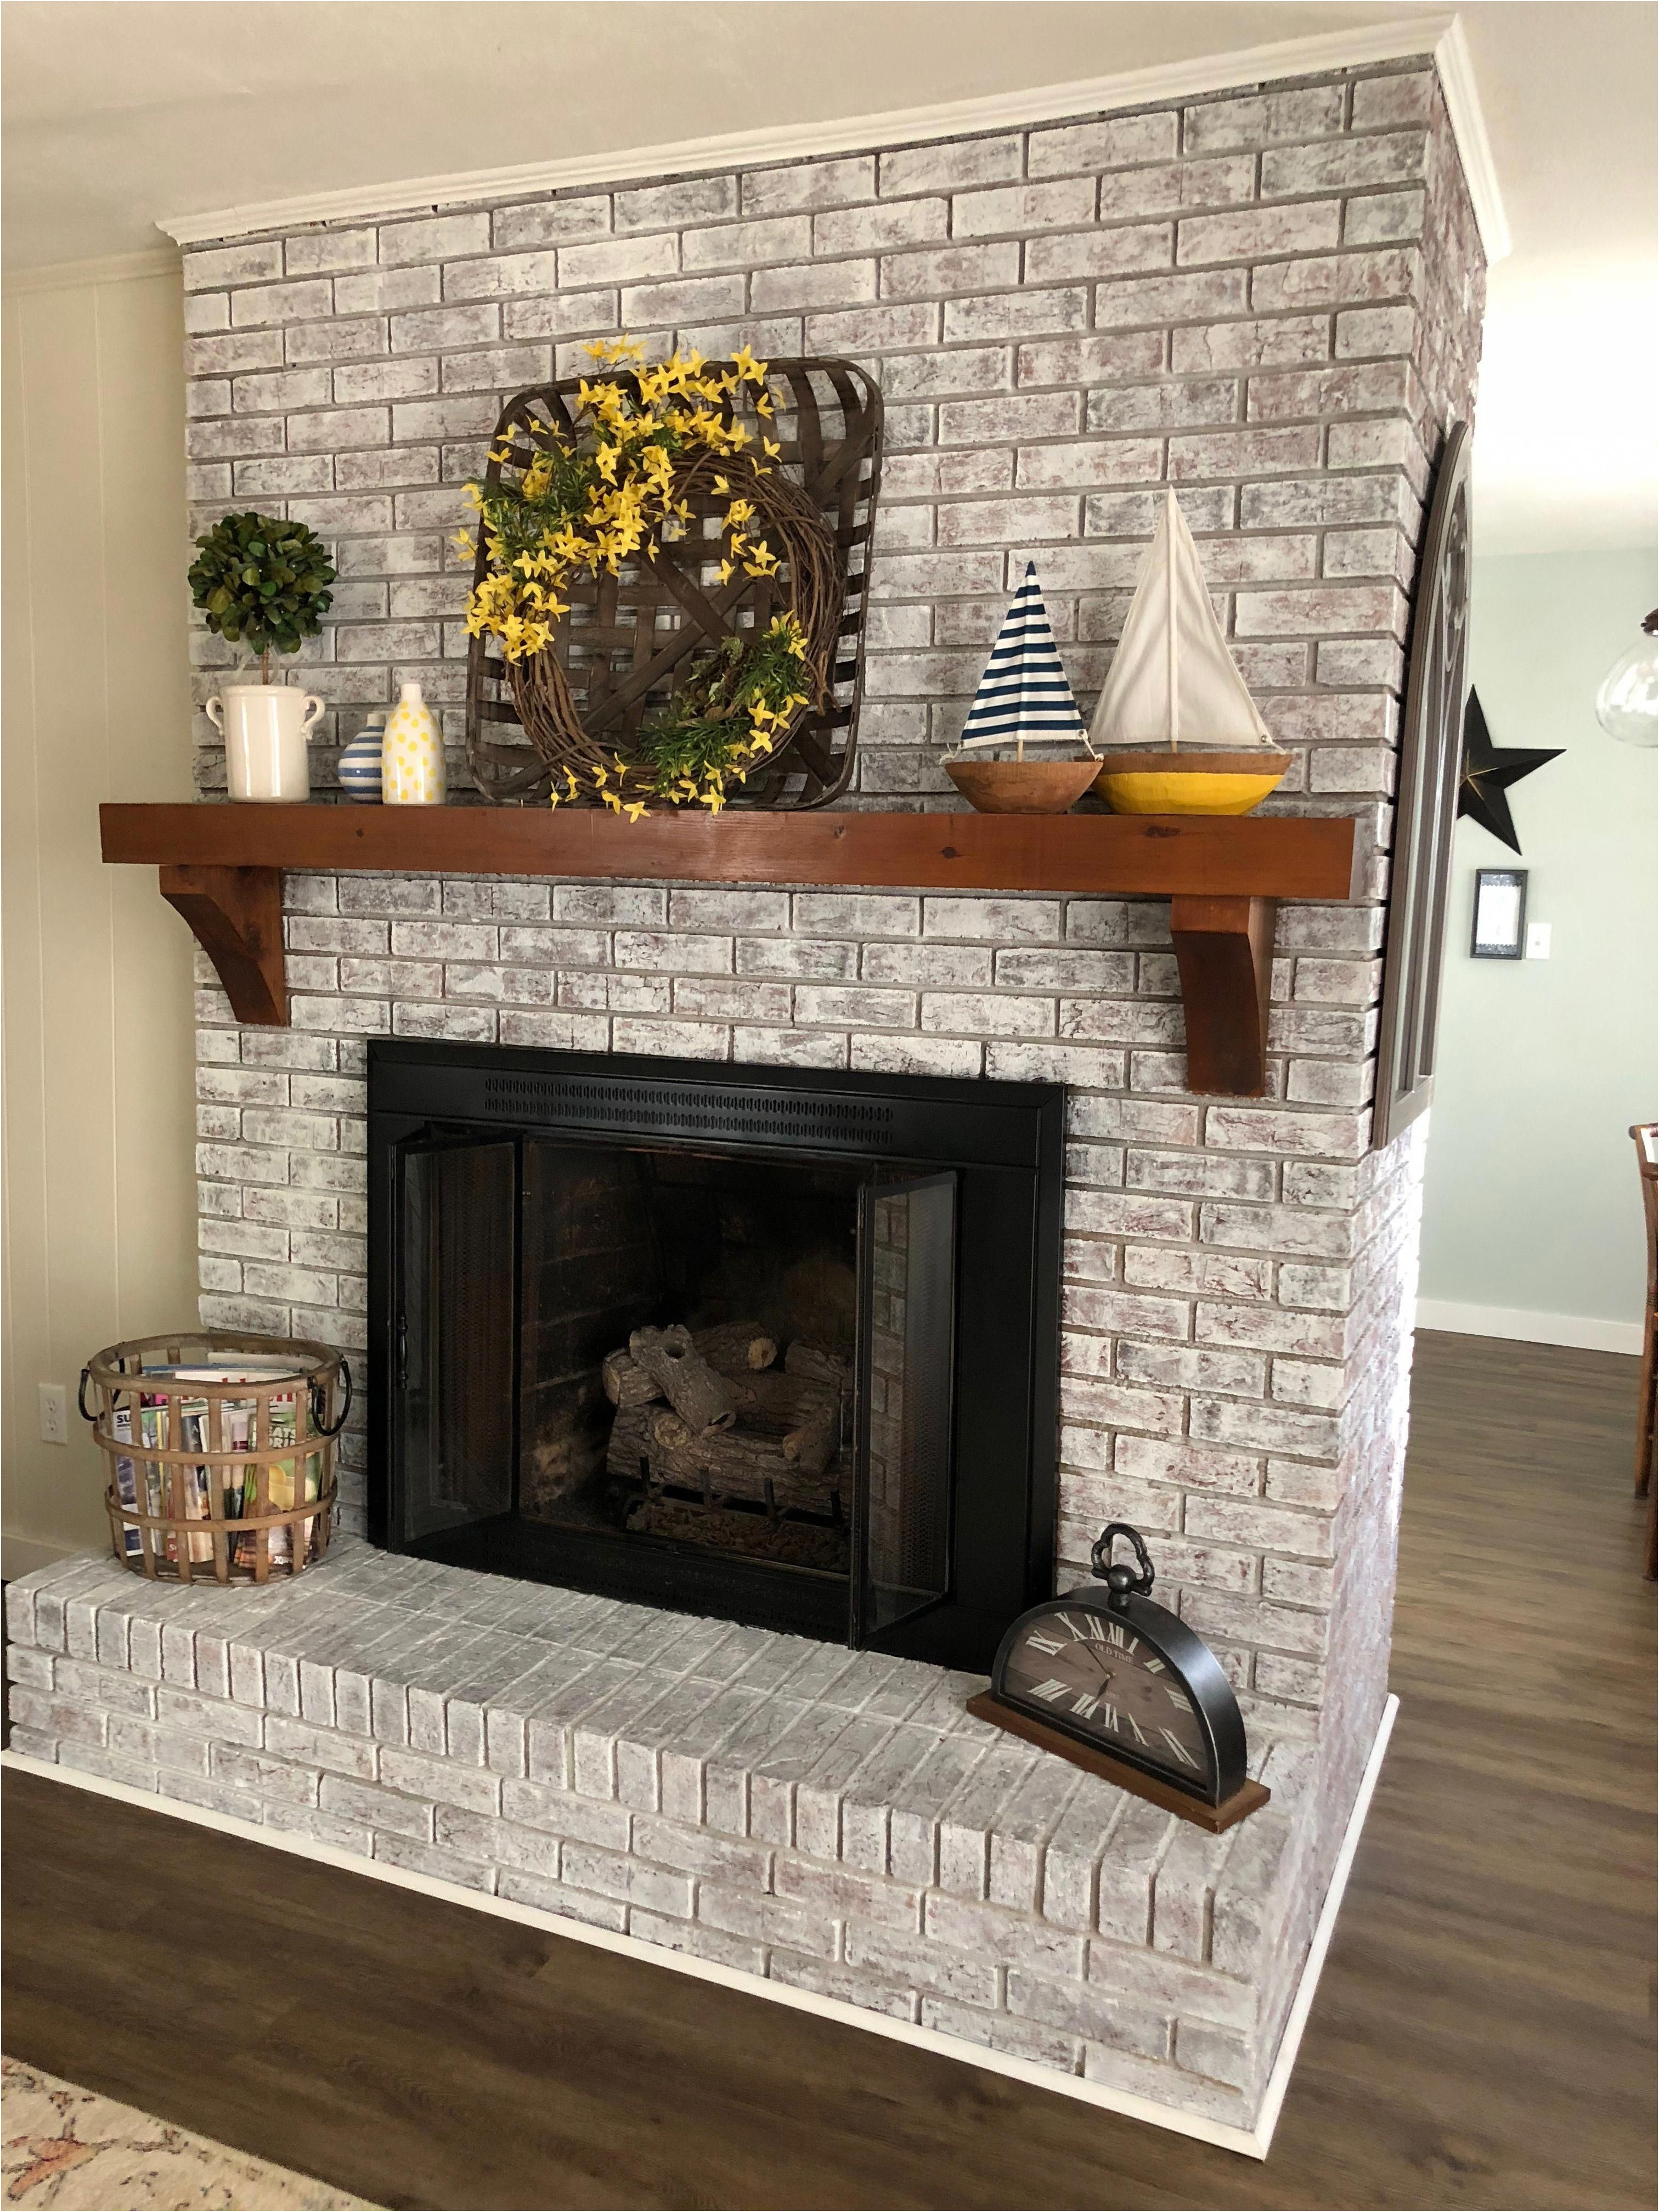 Red Brick Fireplace Makeover Ideas New Painted Brick Fireplace Sw Pure White Over Dark Red Brick